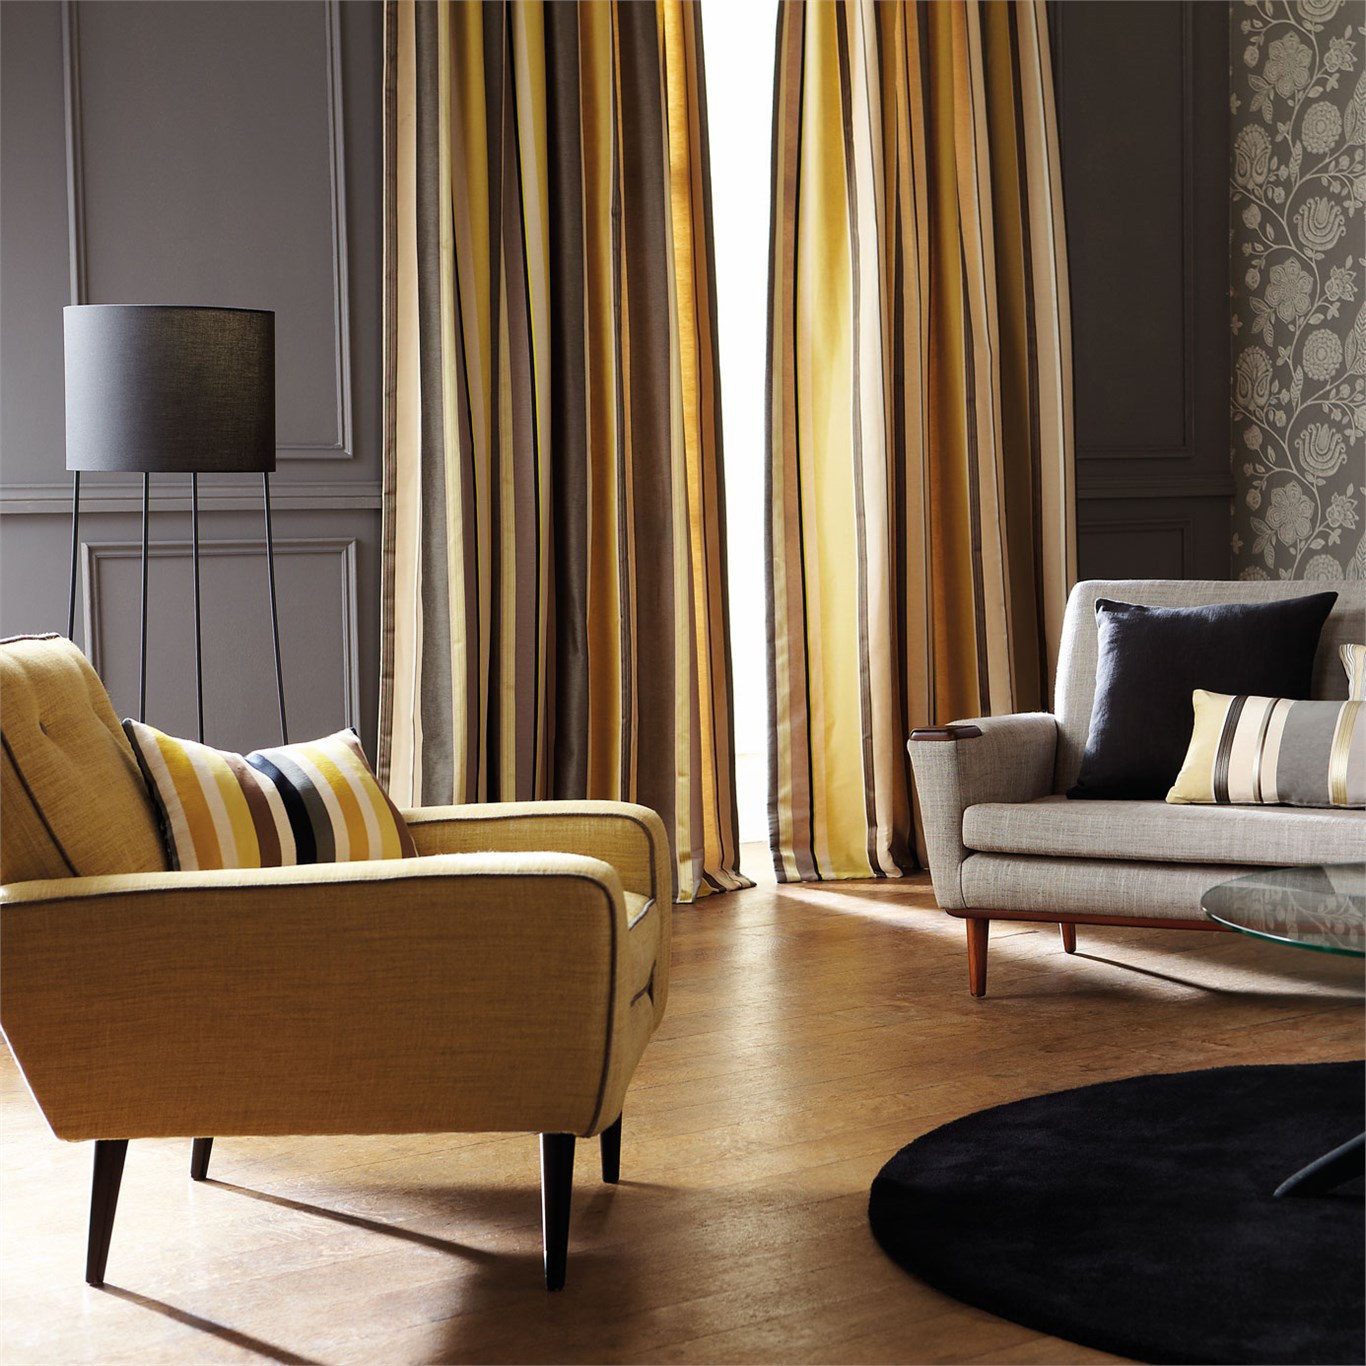 Shop the full range of Harlequin Curtains Dublin from Stillorgan Decor online and in-store